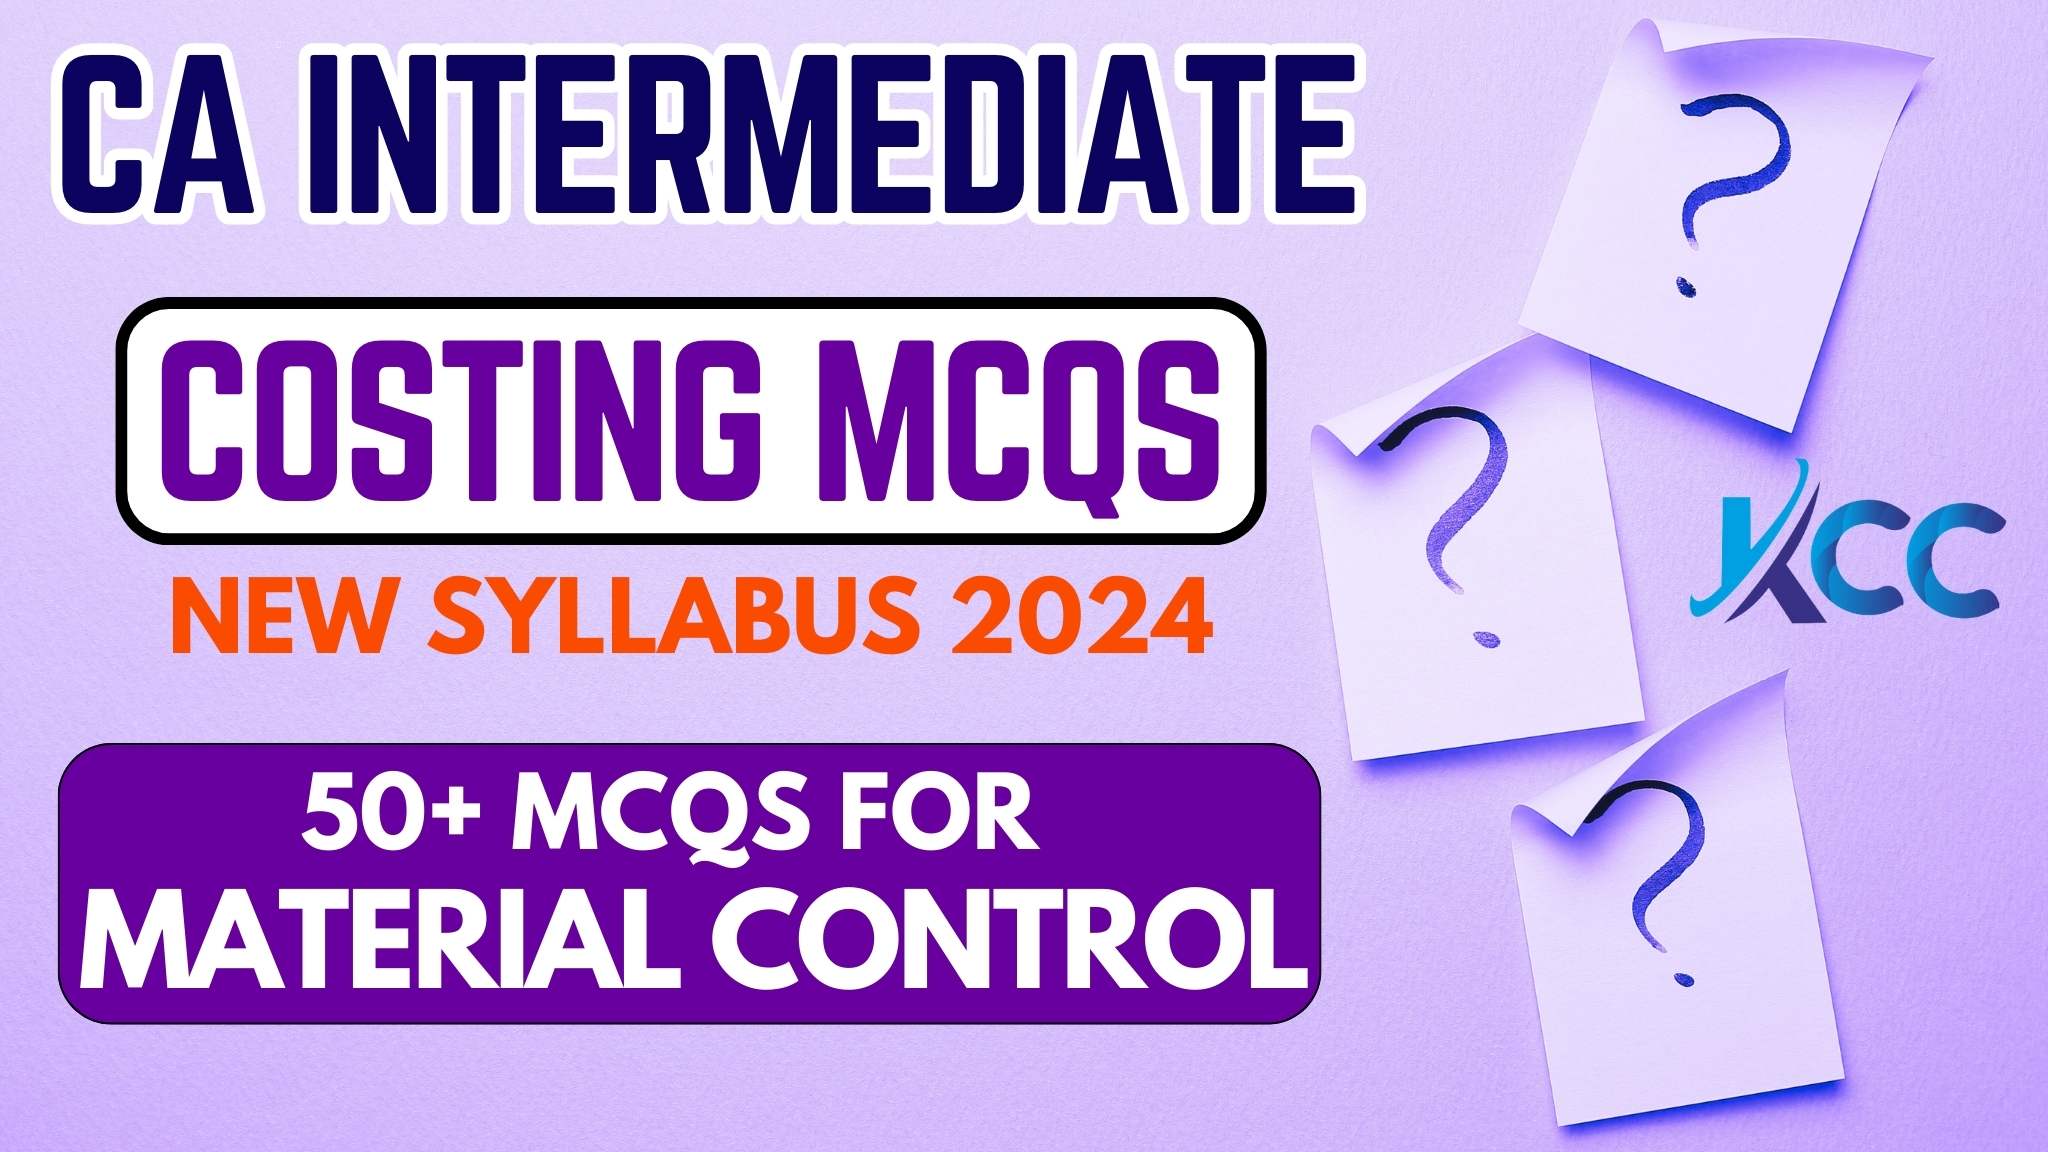 Sandeep Arora Sir at KCC Tutorials provides the best free CA Inter MCQs and Objectives for Material Control for ICAI 2024 New Syllabus